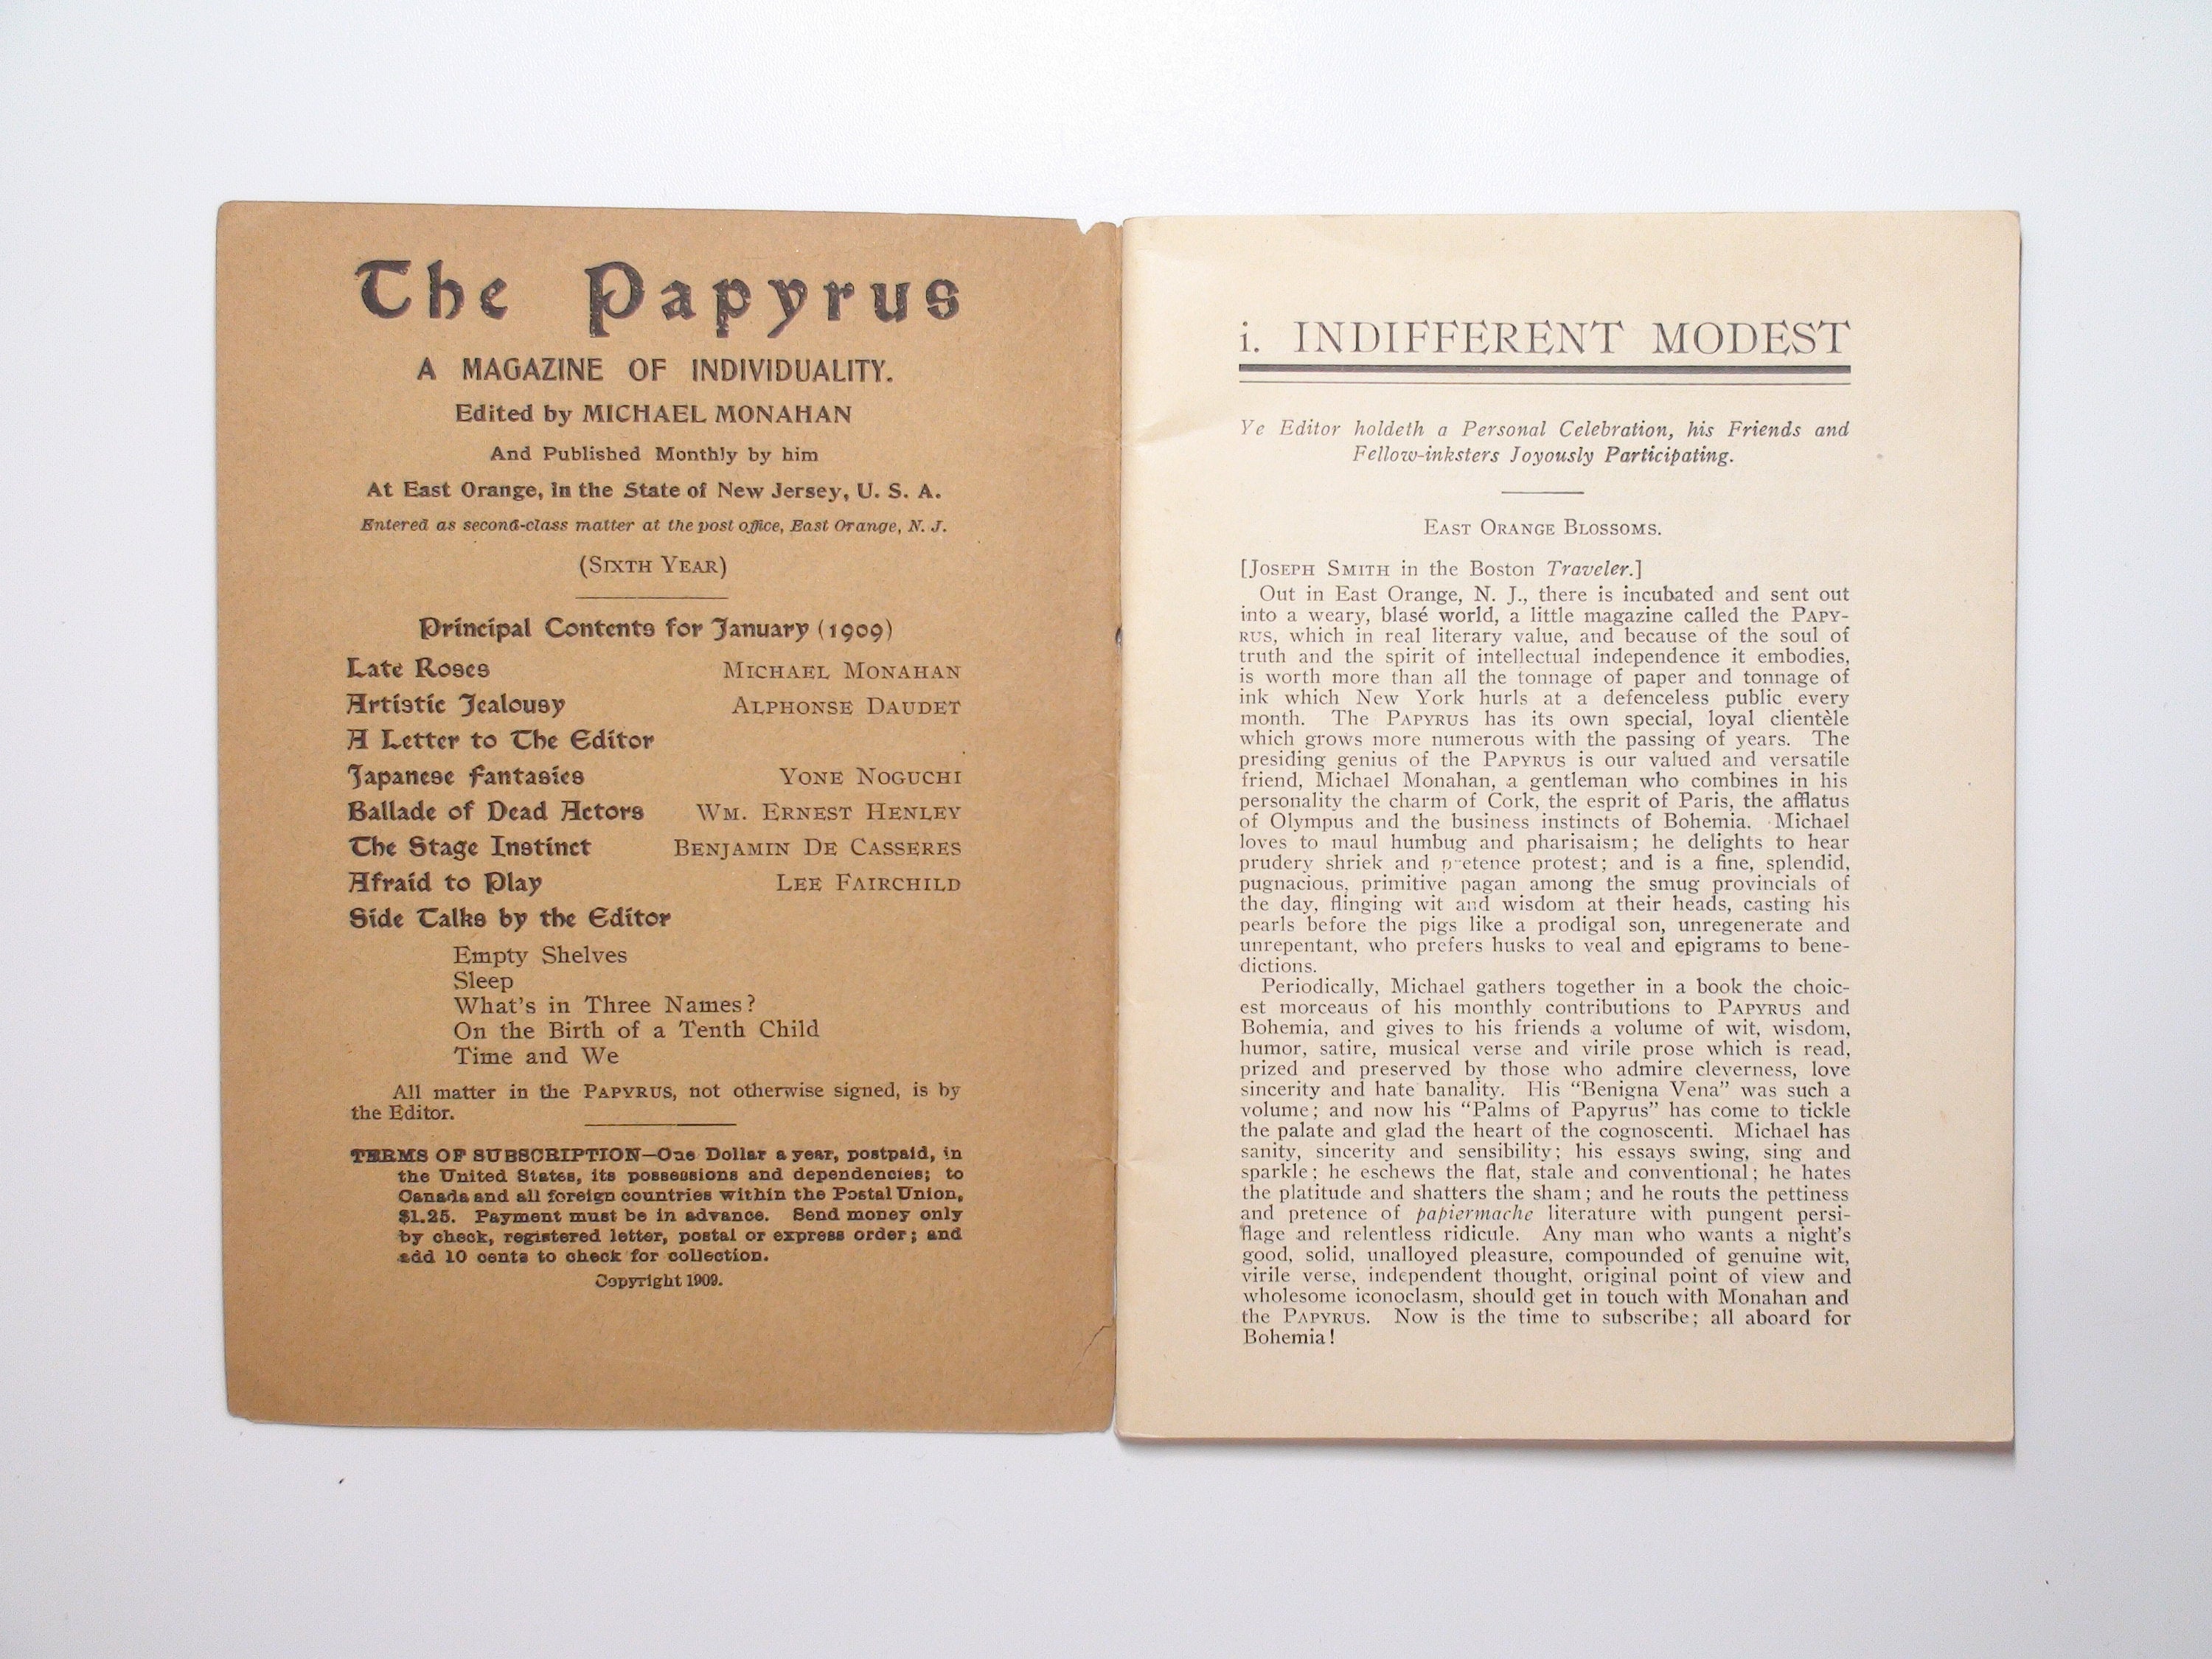 The Papyrus Magazine, Ed. by Michael Monahan, RARE, 1st Ed, January 1909